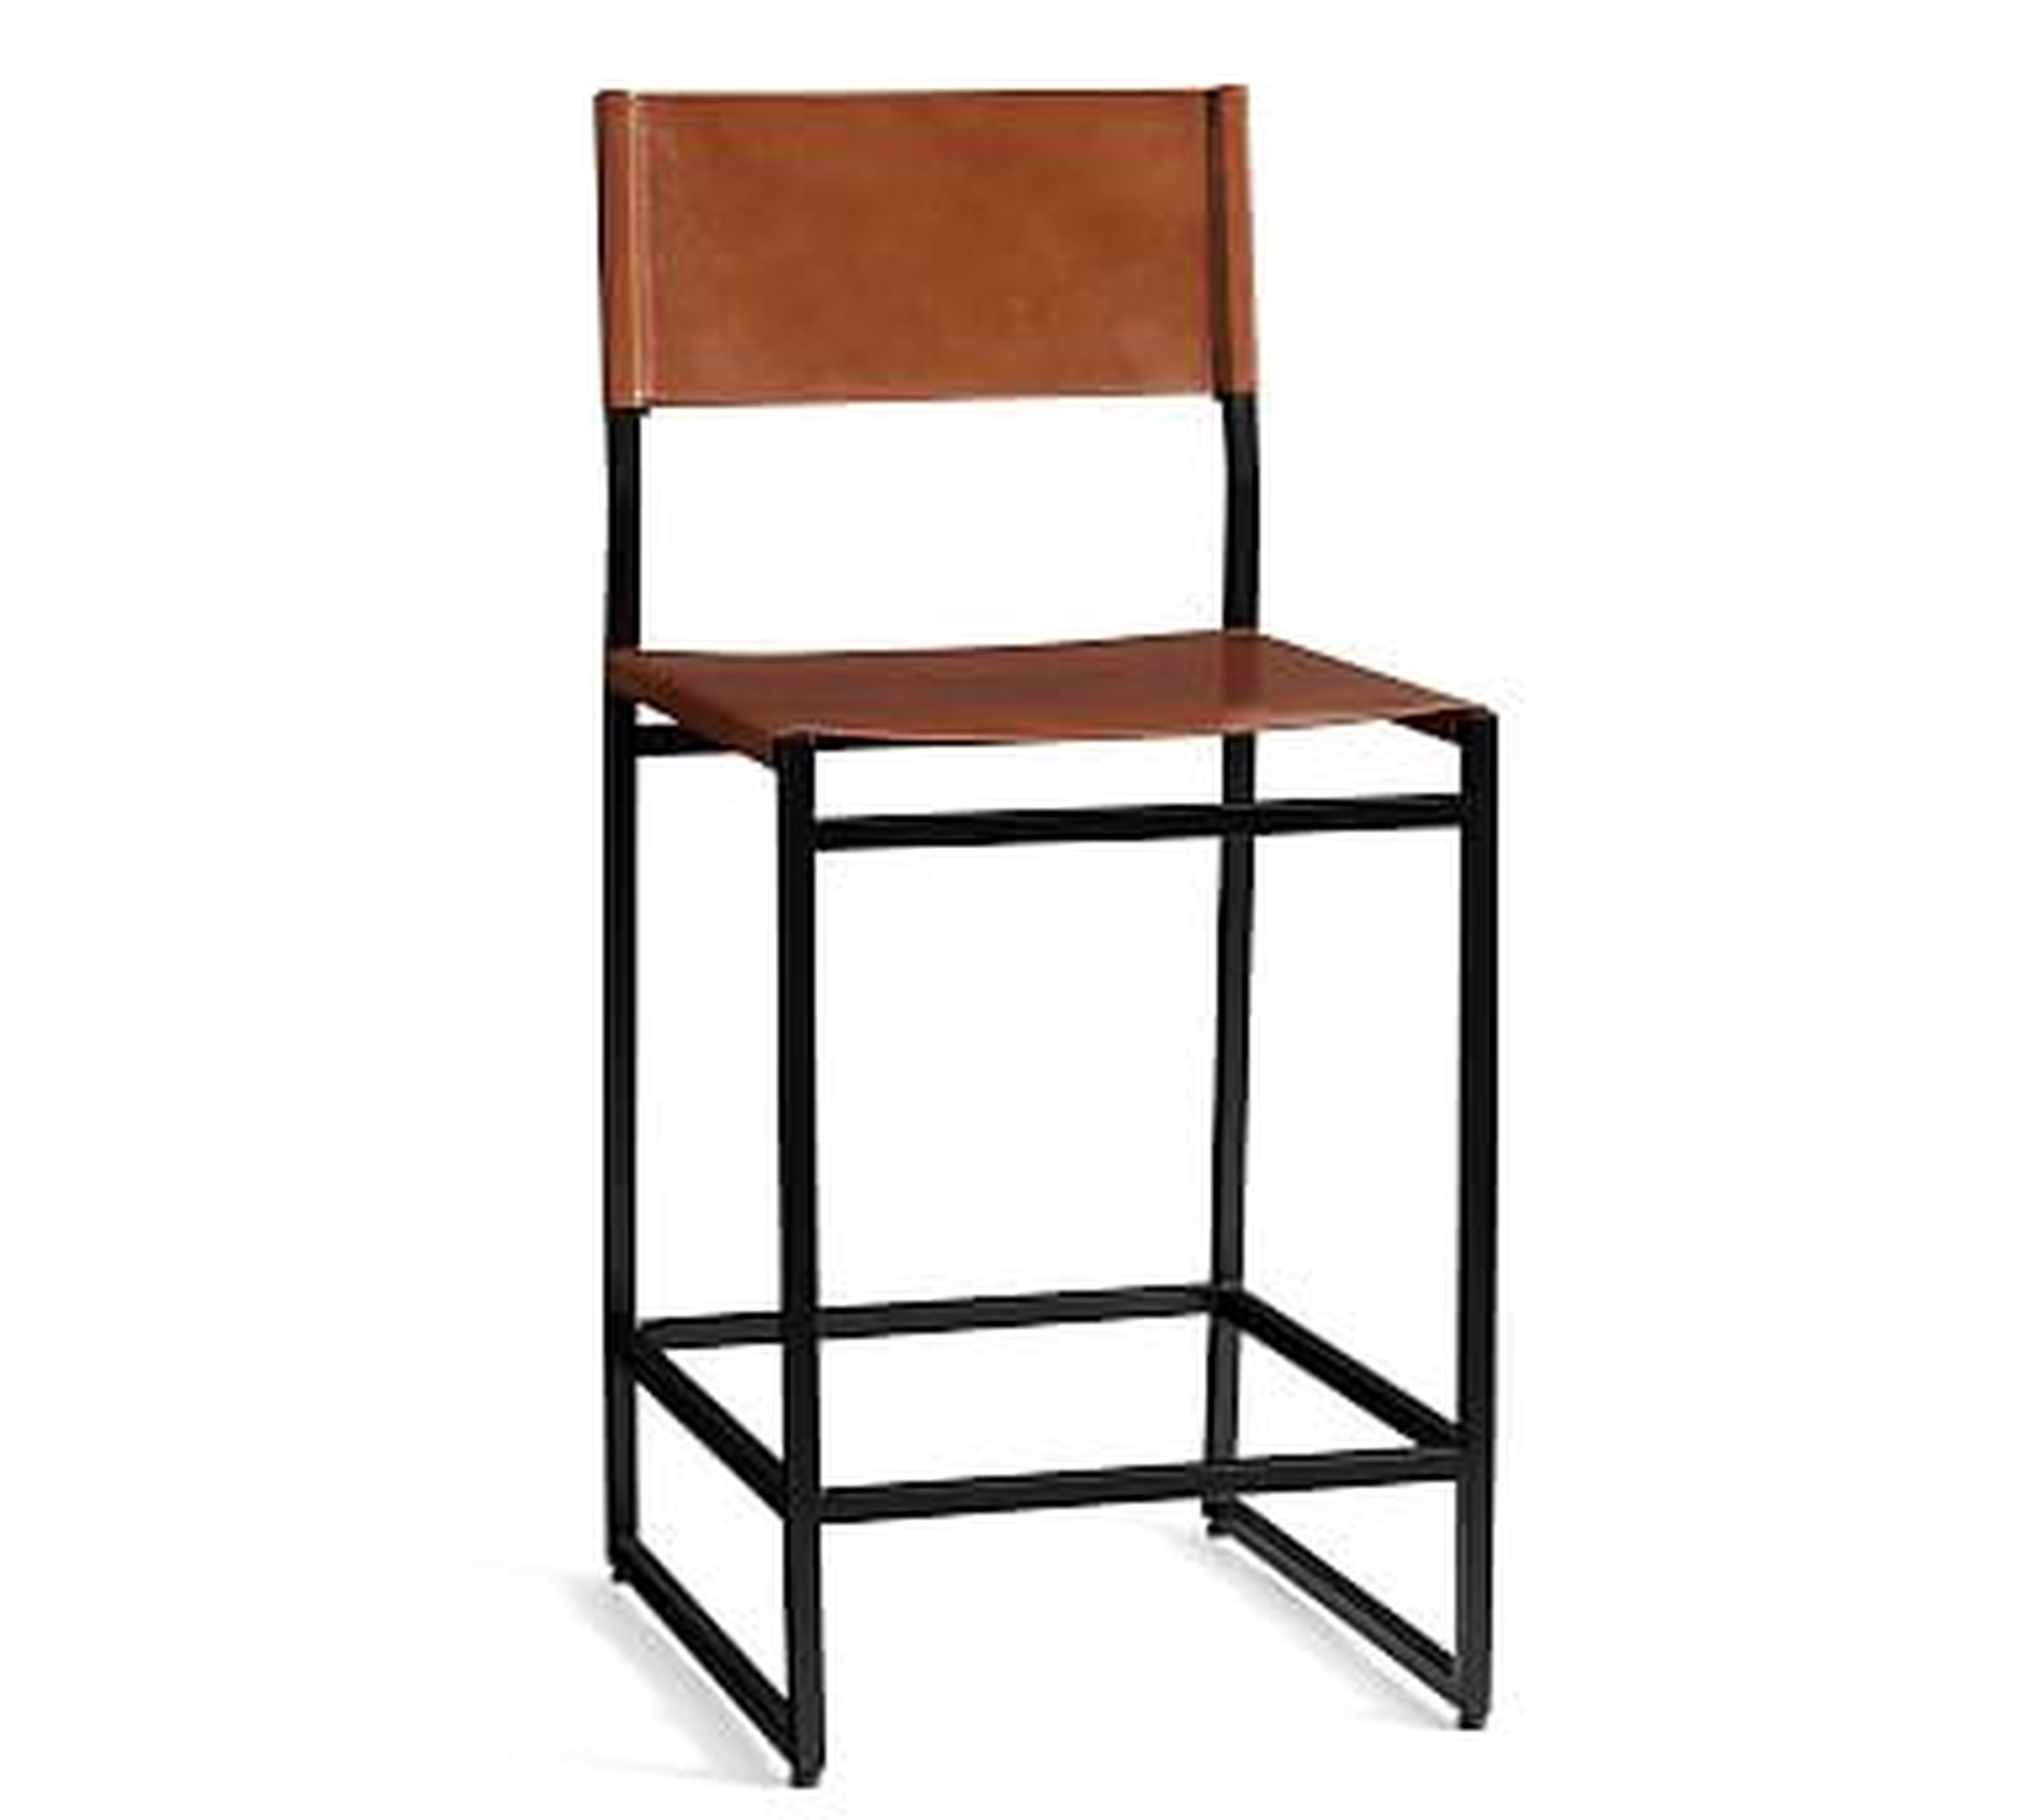 Hardy Leather Counter Stool, Bronze/Saddle Tan Leather - Pottery Barn